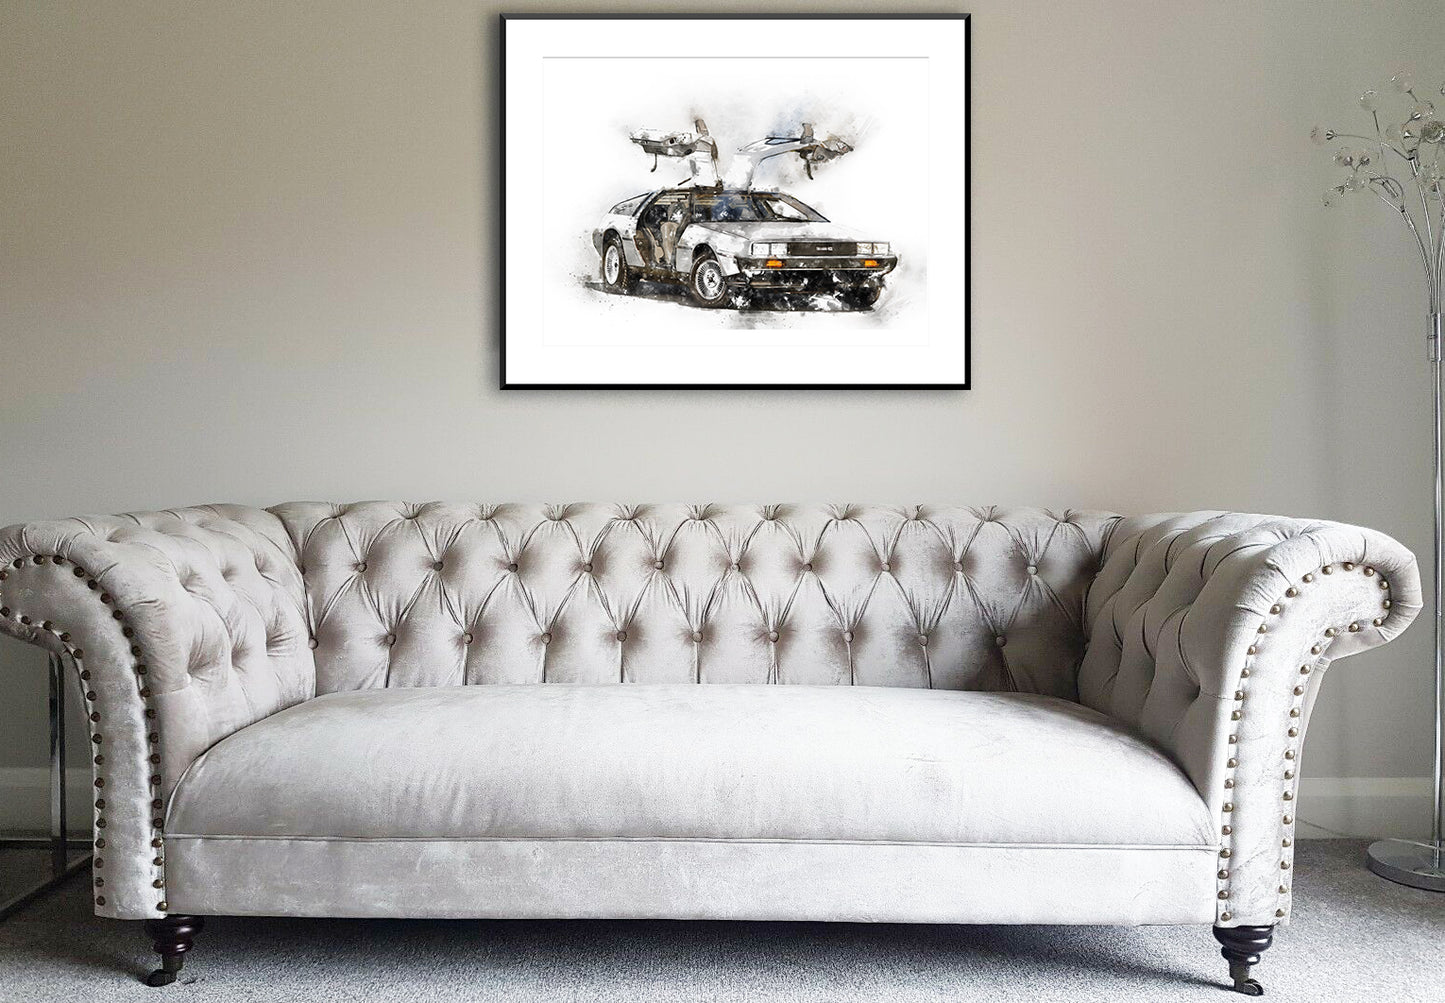 DeLorean Classic Car Wall Art Print - available in different sizes